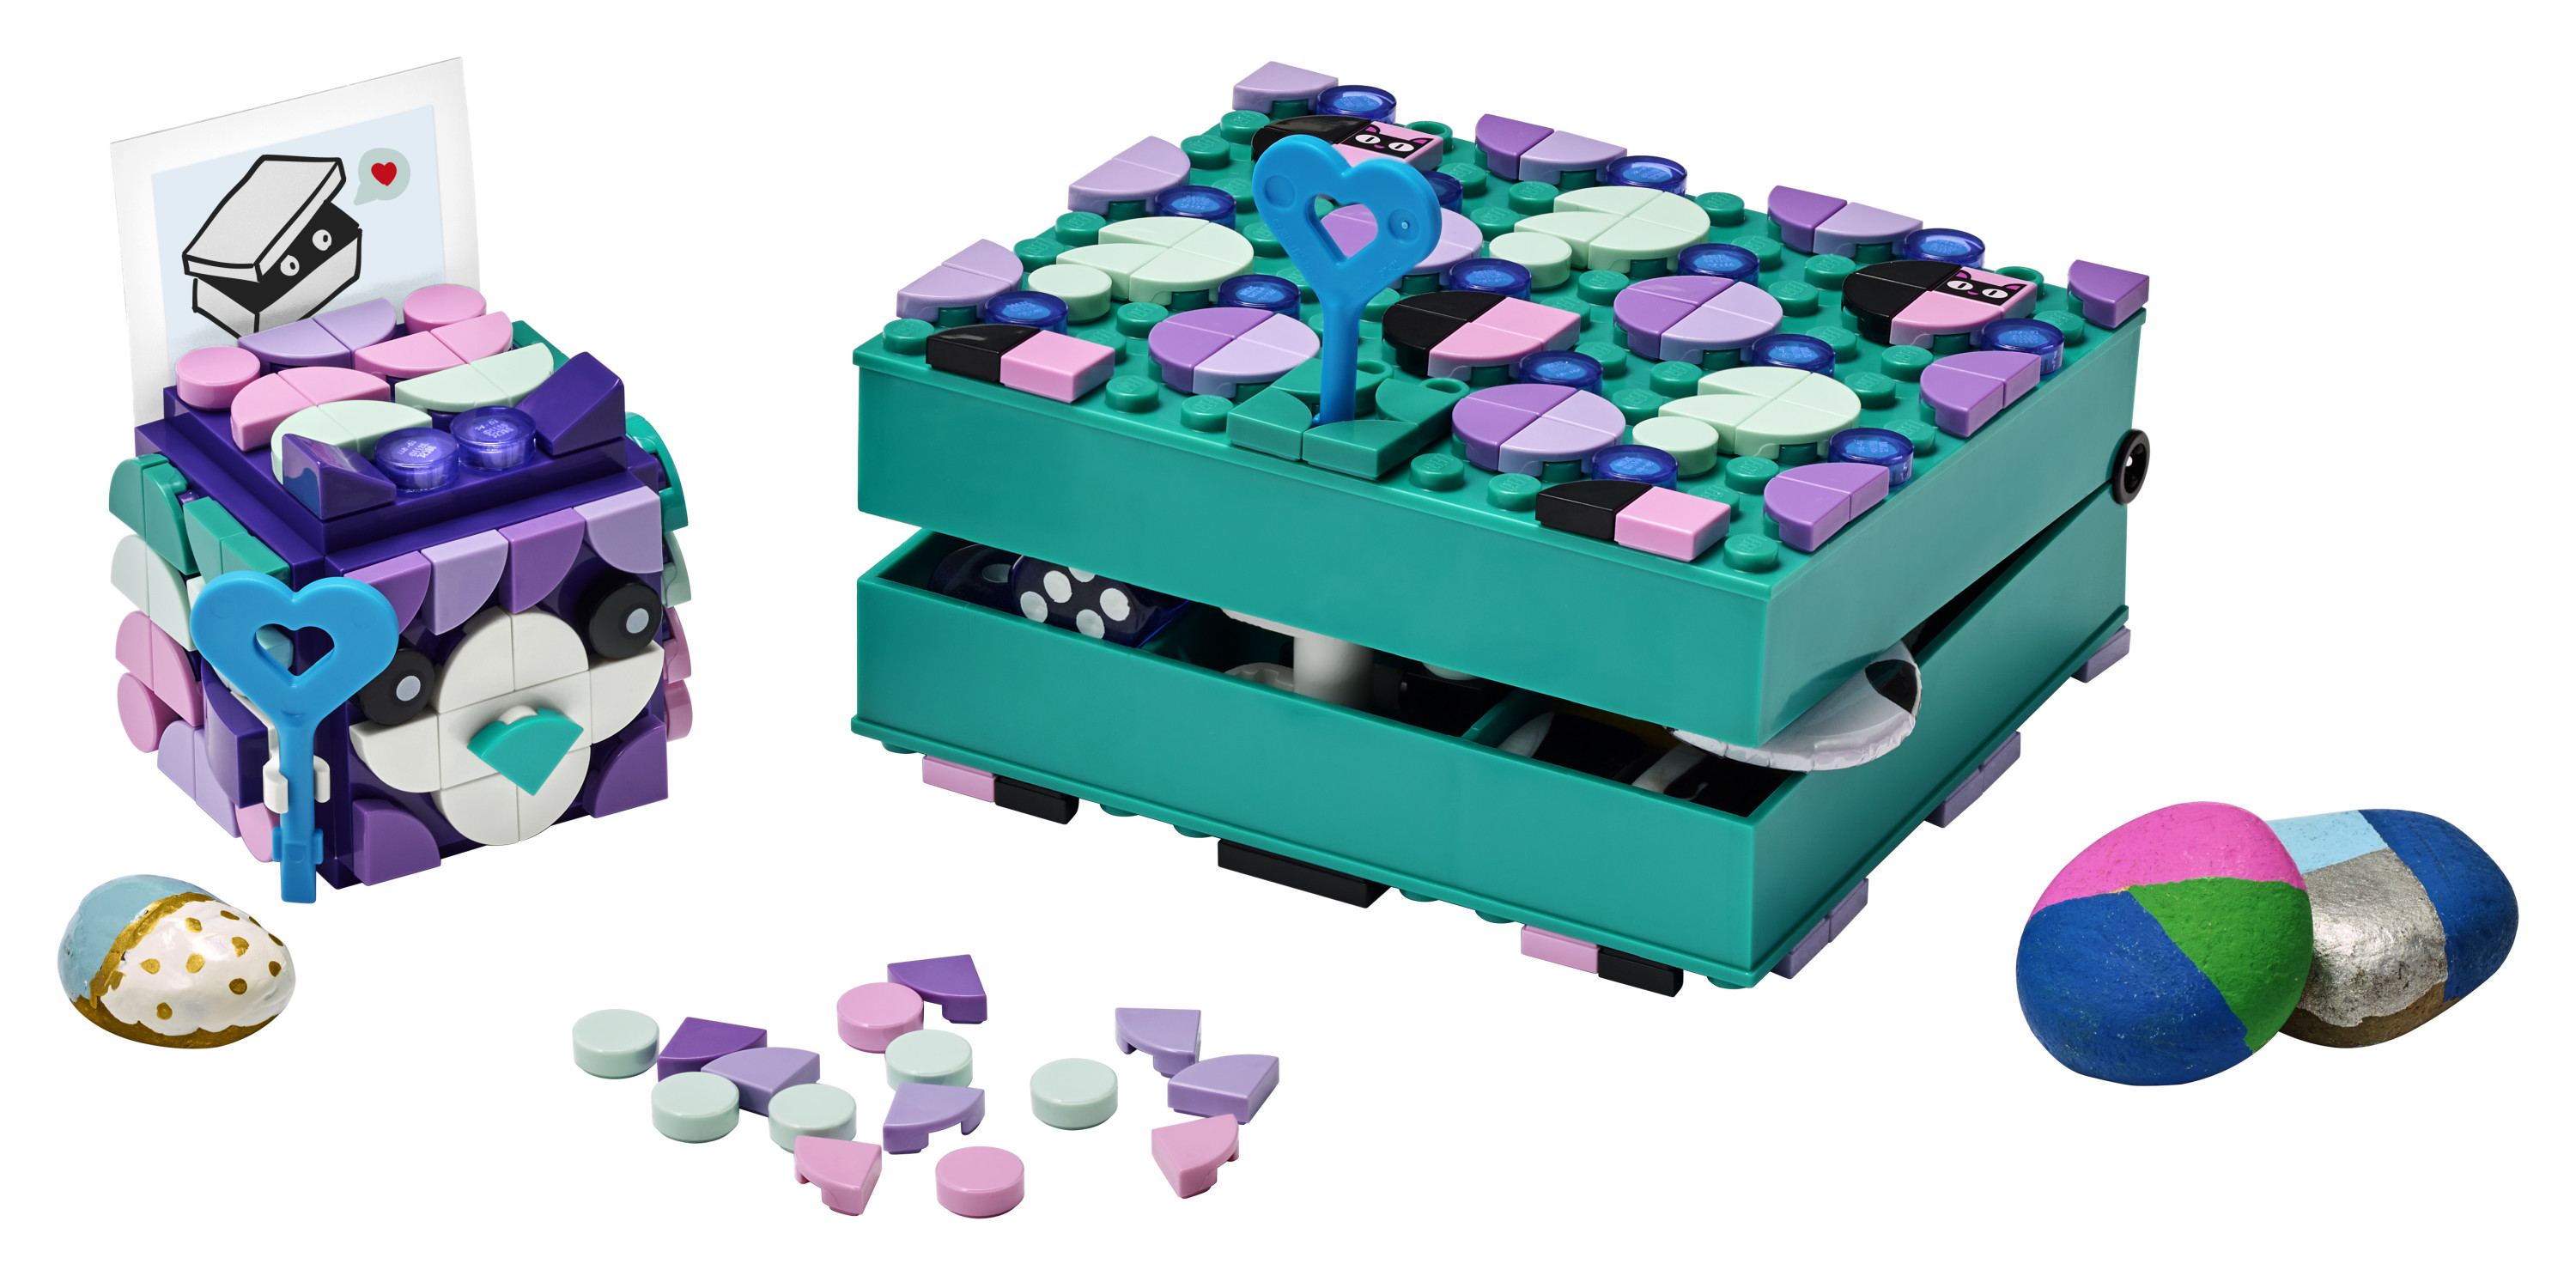 LEGO DOTS Secret Boxes 41925 DIY Craft Decorations Kit; Makes a Creative Gift for Kids (273 Pieces) - image 3 of 7